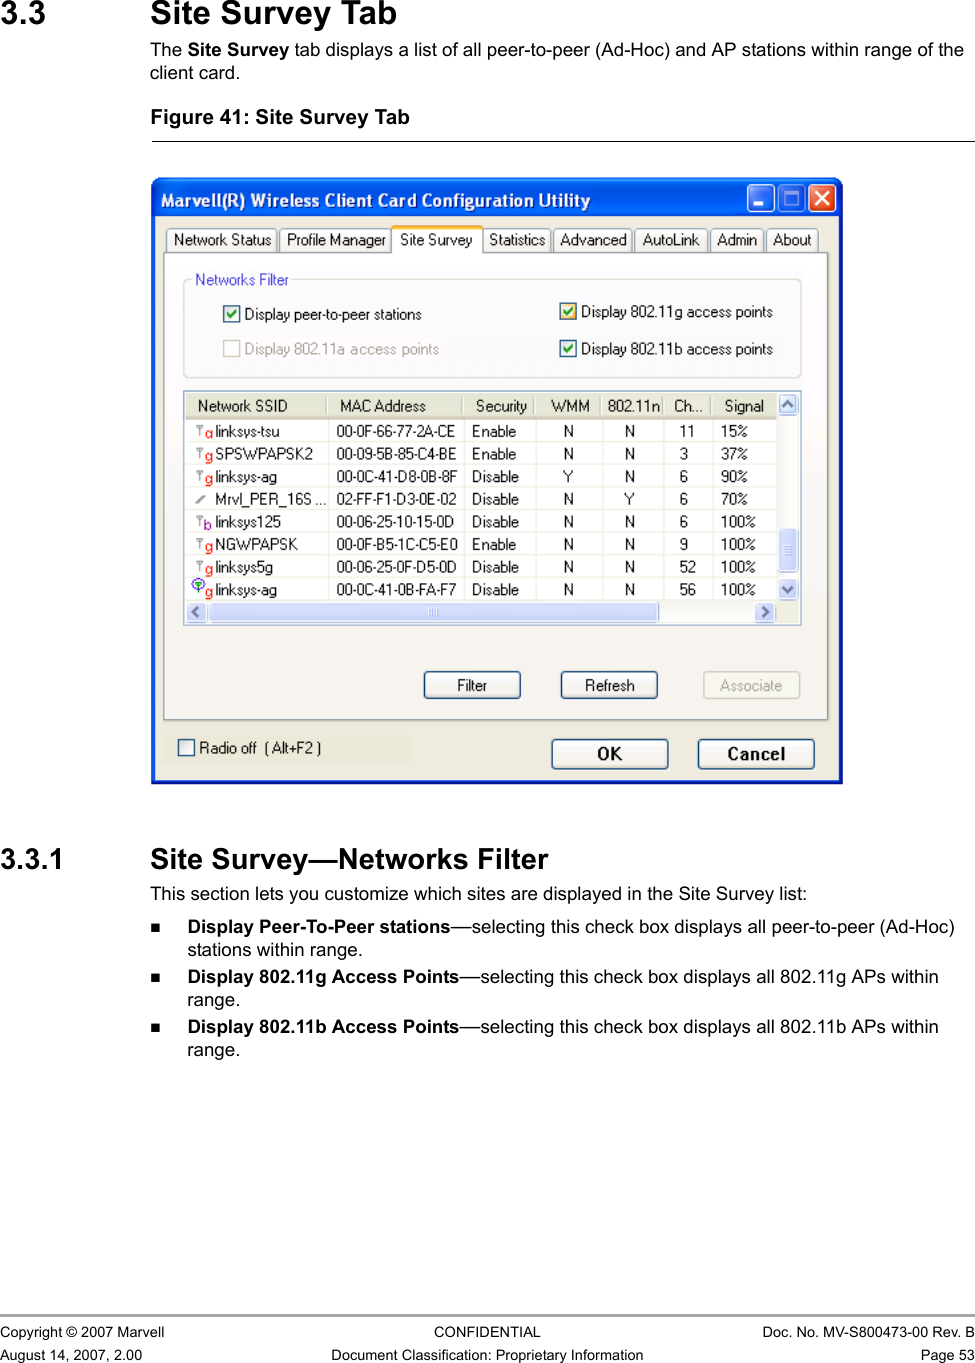 Marvell Wireless Configuration Utility User InterfaceSite Survey Tab                         Copyright © 2007 Marvell CONFIDENTIAL Doc. No. MV-S800473-00 Rev. BAugust 14, 2007, 2.00 Document Classification: Proprietary Information Page 53 3.3 Site Survey TabThe Site Survey tab displays a list of all peer-to-peer (Ad-Hoc) and AP stations within range of the client card.3.3.1 Site Survey—Networks FilterThis section lets you customize which sites are displayed in the Site Survey list:Display Peer-To-Peer stations—selecting this check box displays all peer-to-peer (Ad-Hoc) stations within range.Display 802.11g Access Points—selecting this check box displays all 802.11g APs within range.Display 802.11b Access Points—selecting this check box displays all 802.11b APs within range.Figure 41: Site Survey Tab                         